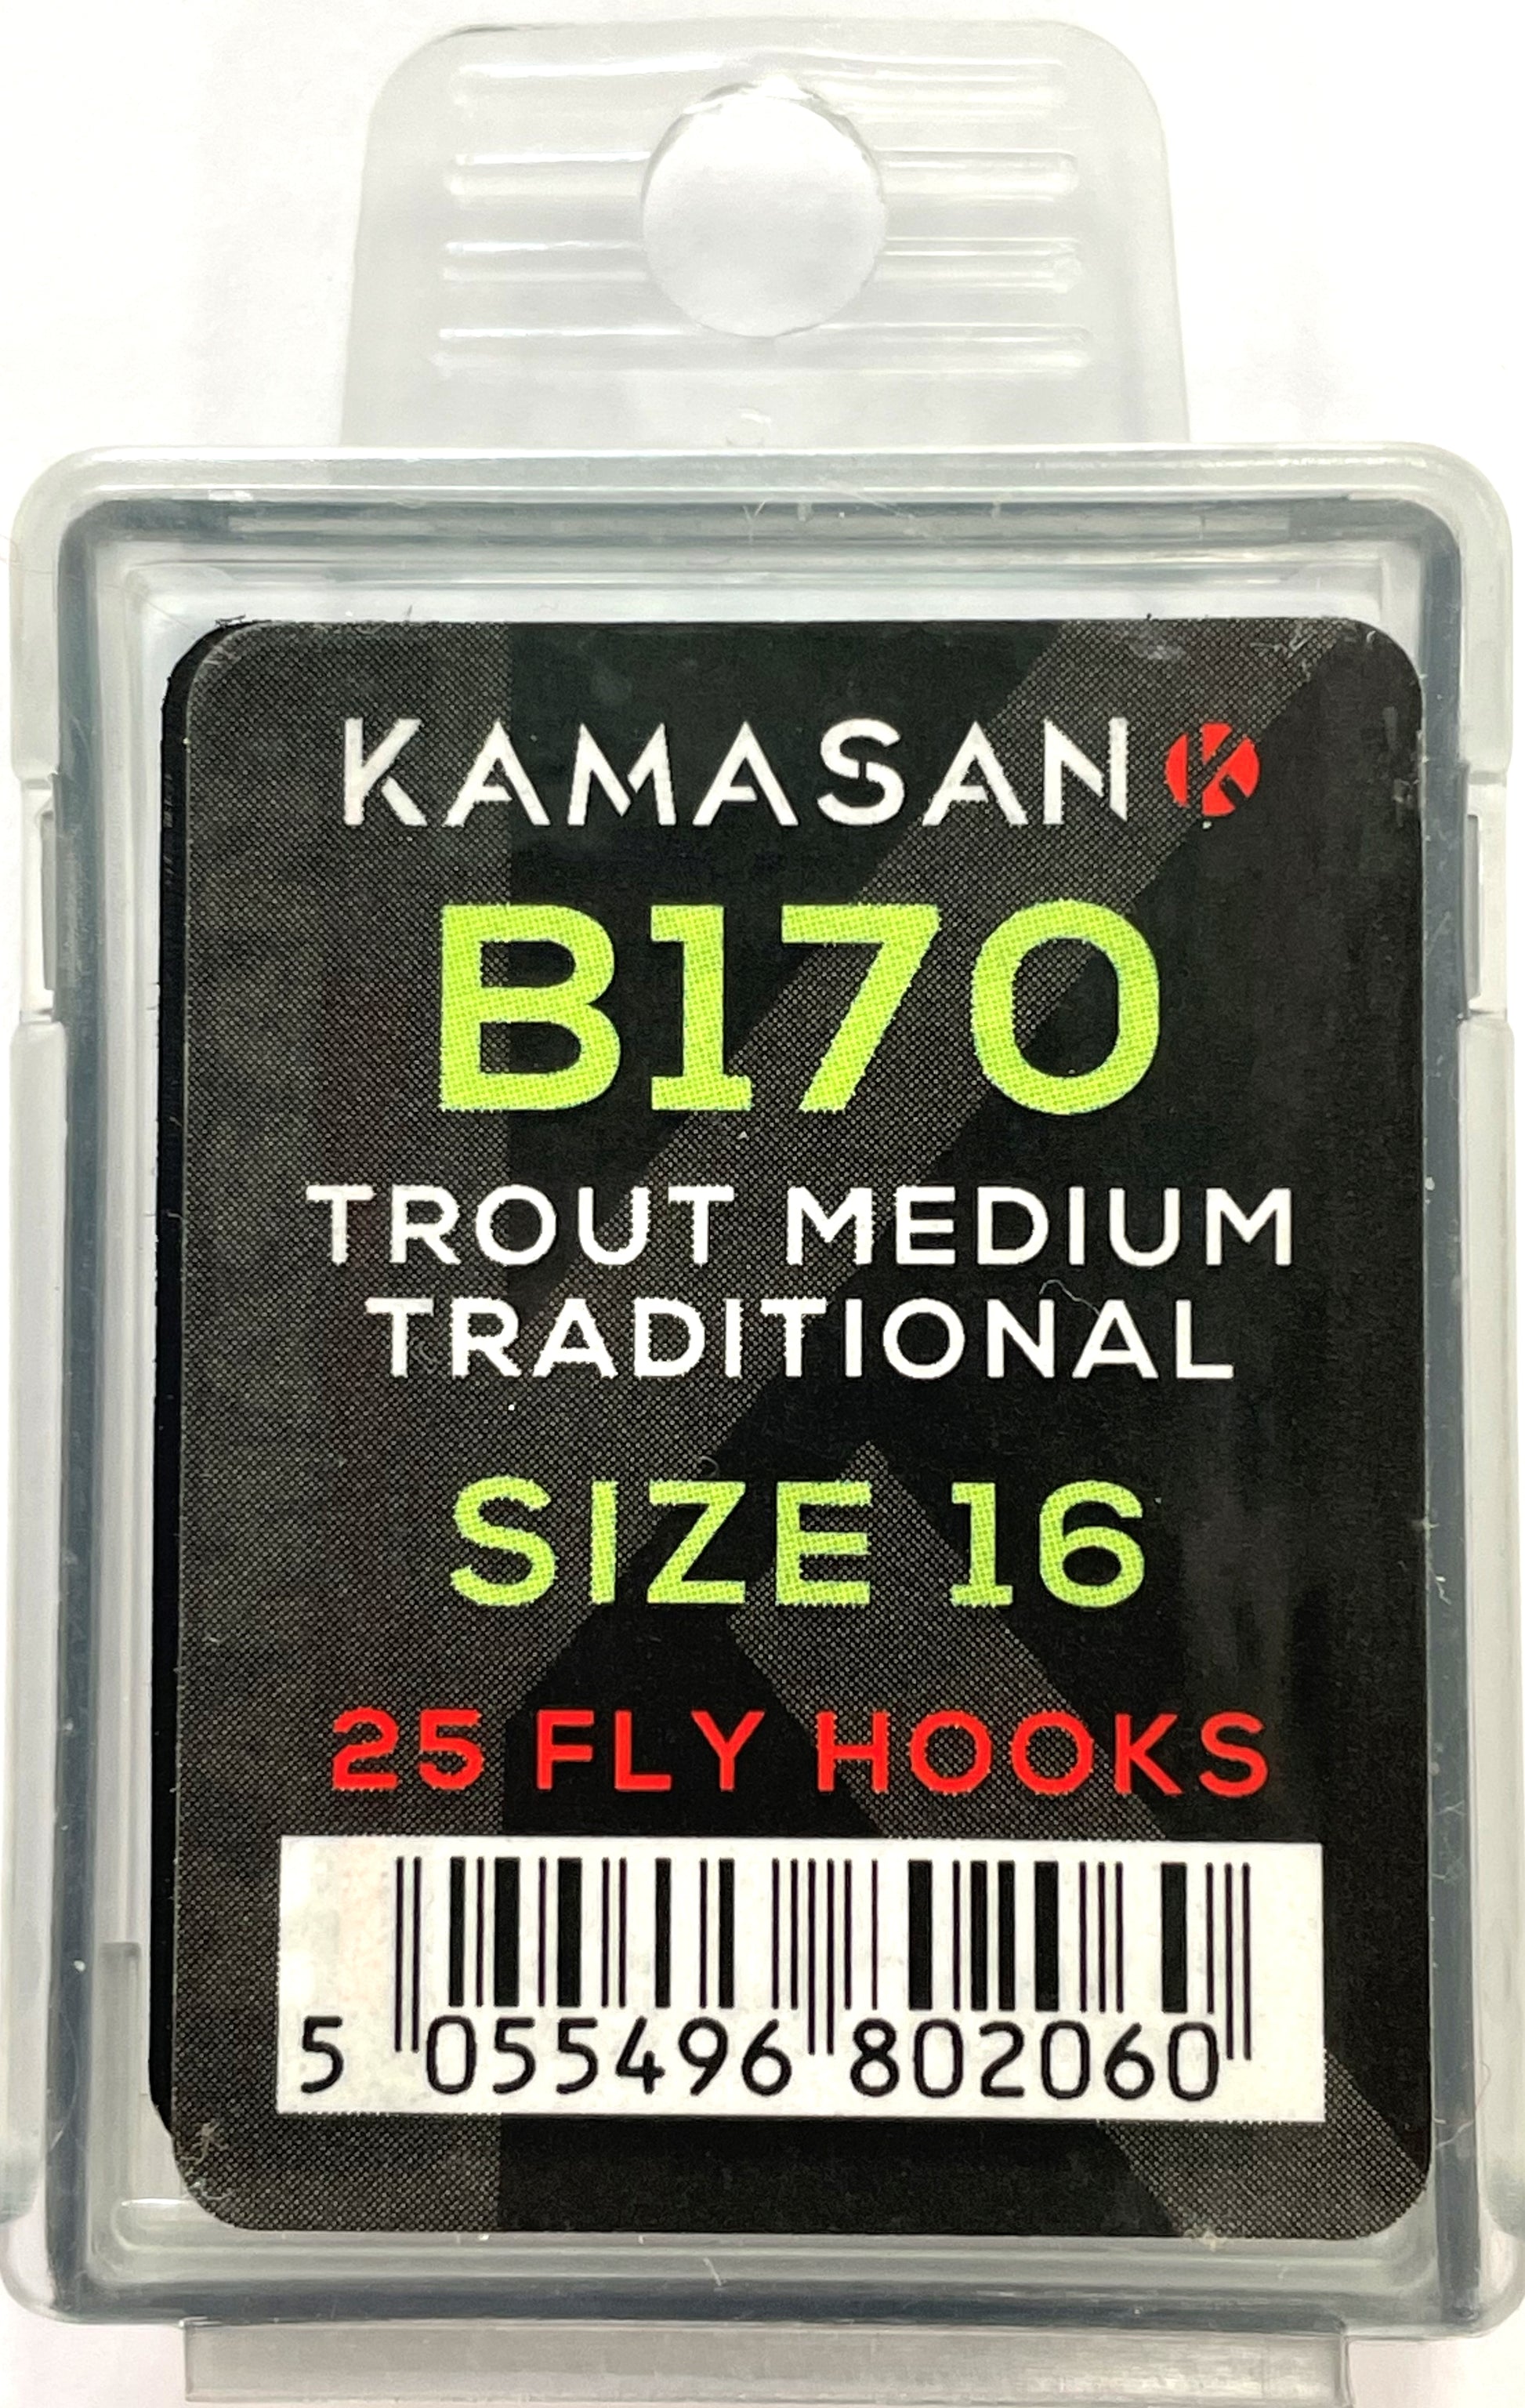 Kamasan B170 Trout Medium Traditional Fly Hooks (Size 16) – Trophy Trout  Lures and Fly Fishing